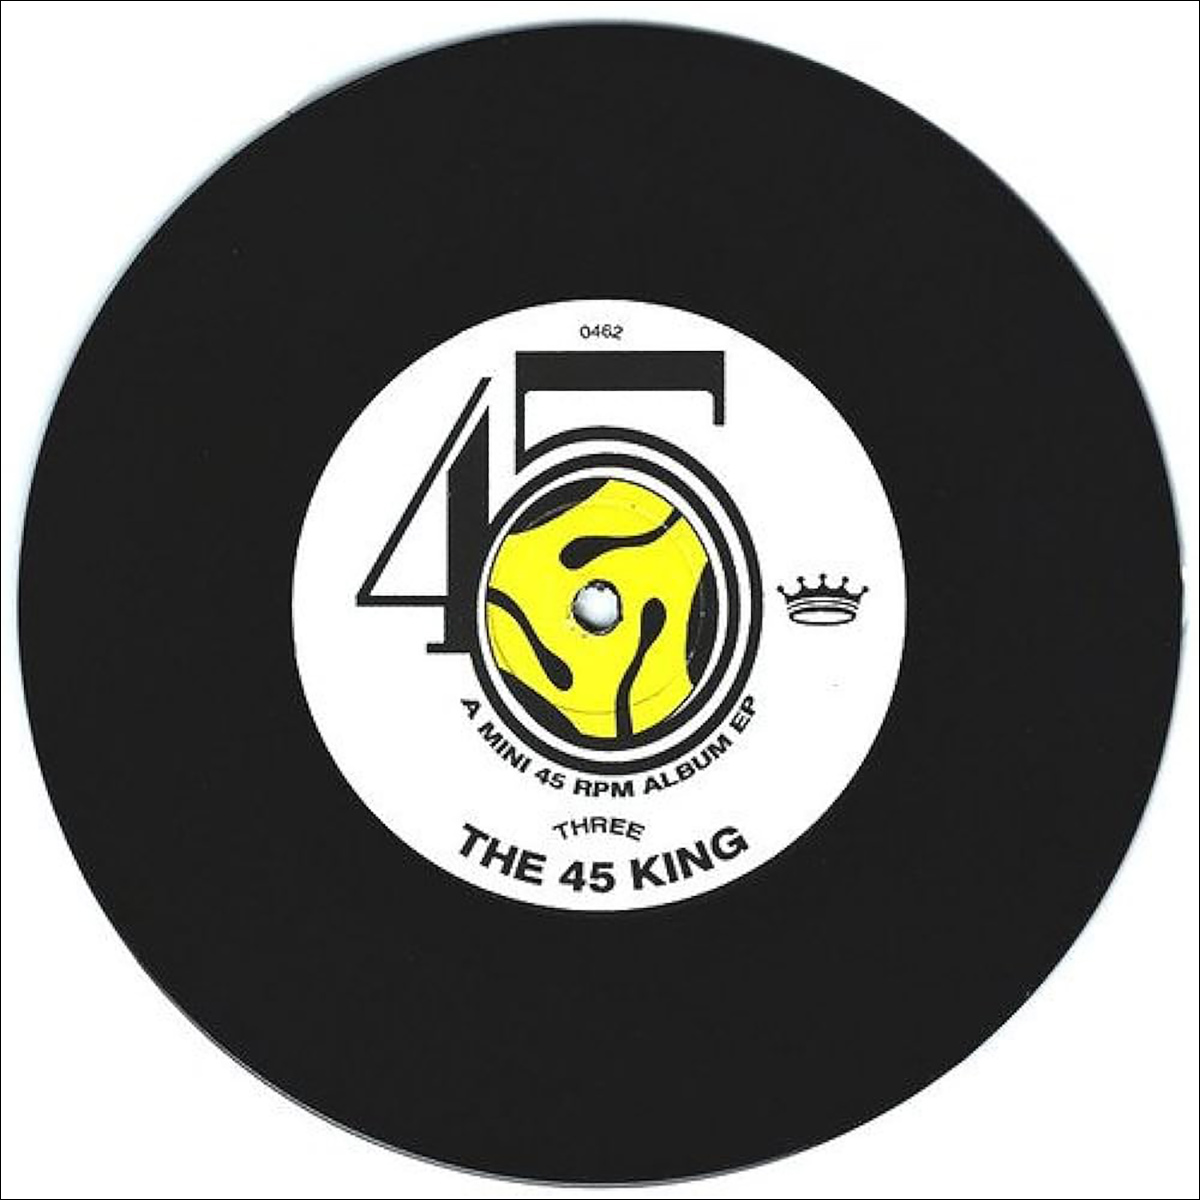 A vinyl record released by The 45 King